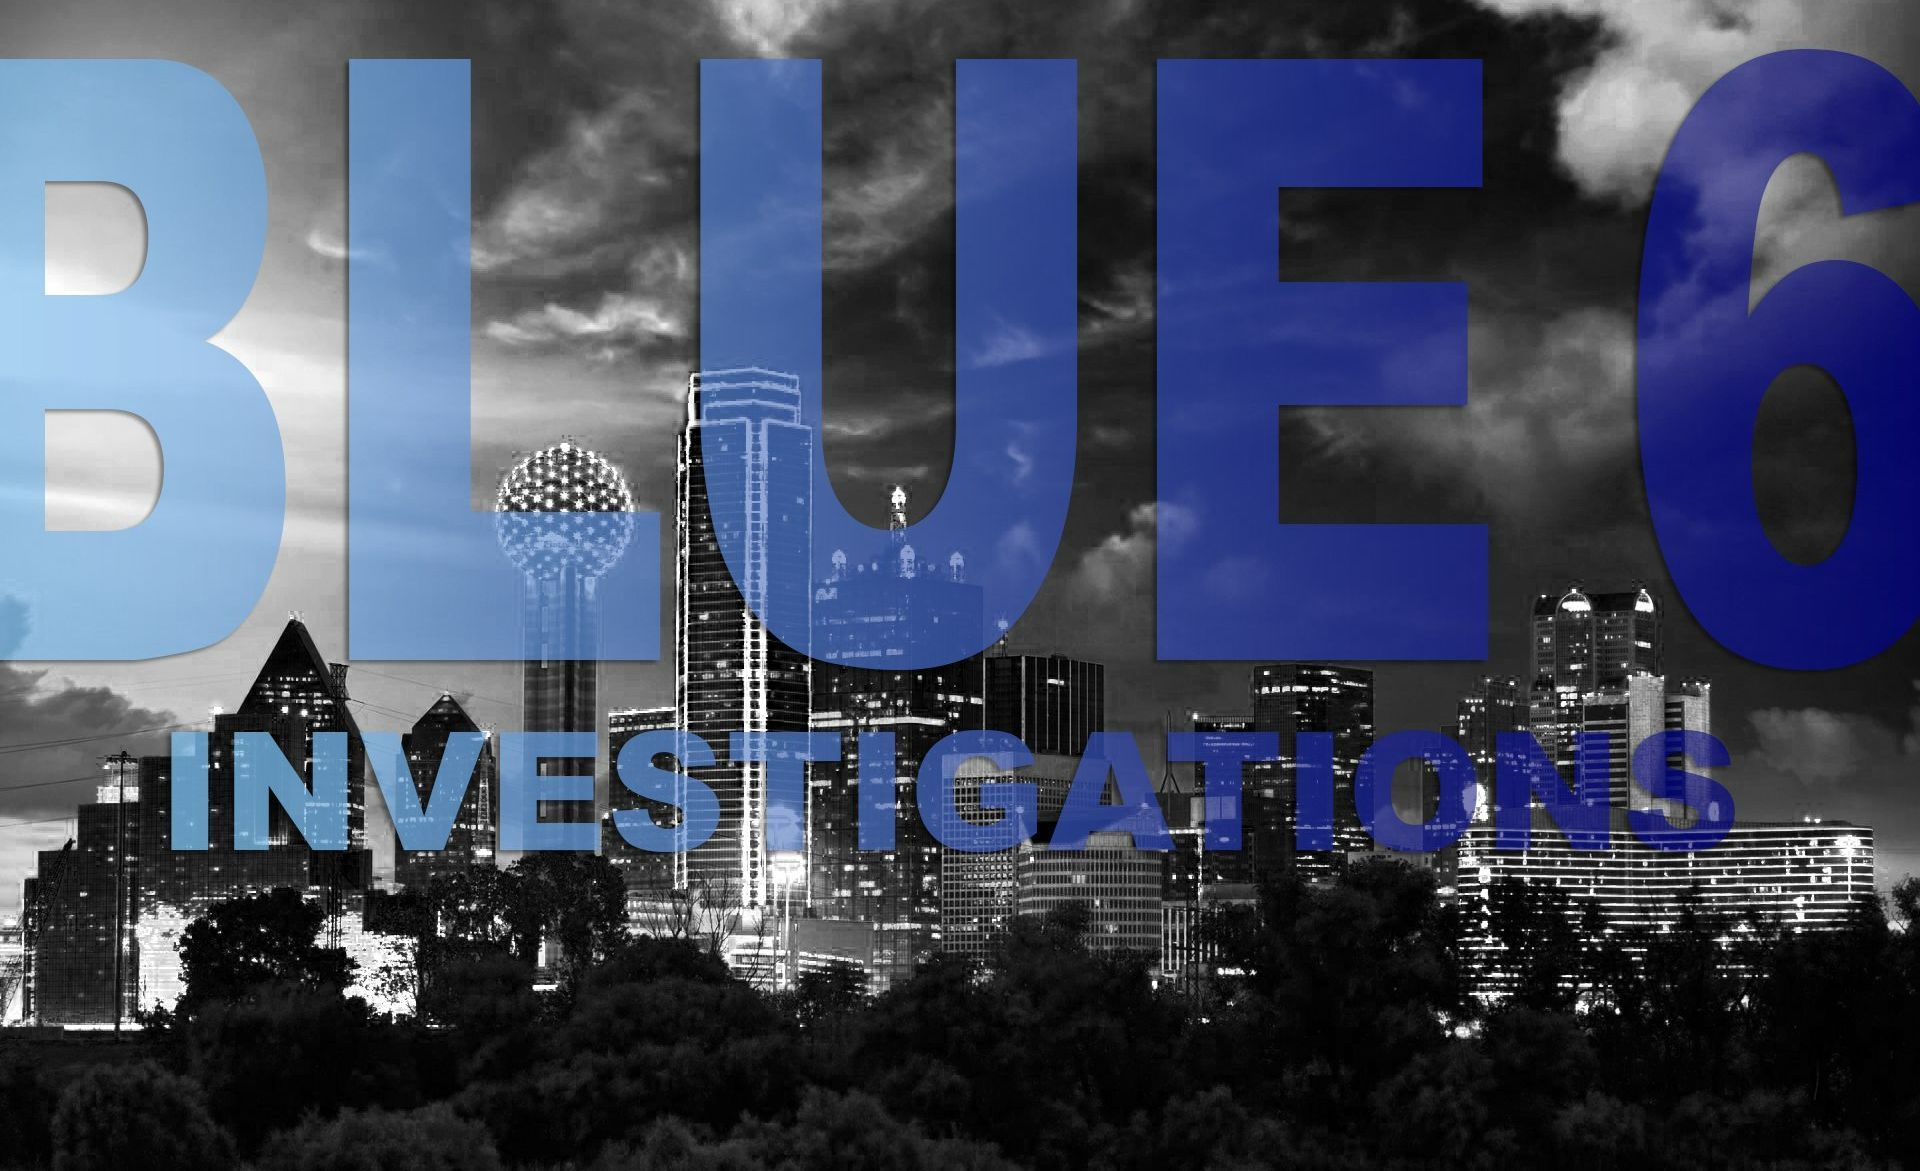 Personal Security — Blue 6 Investigations in Grapevine, TX